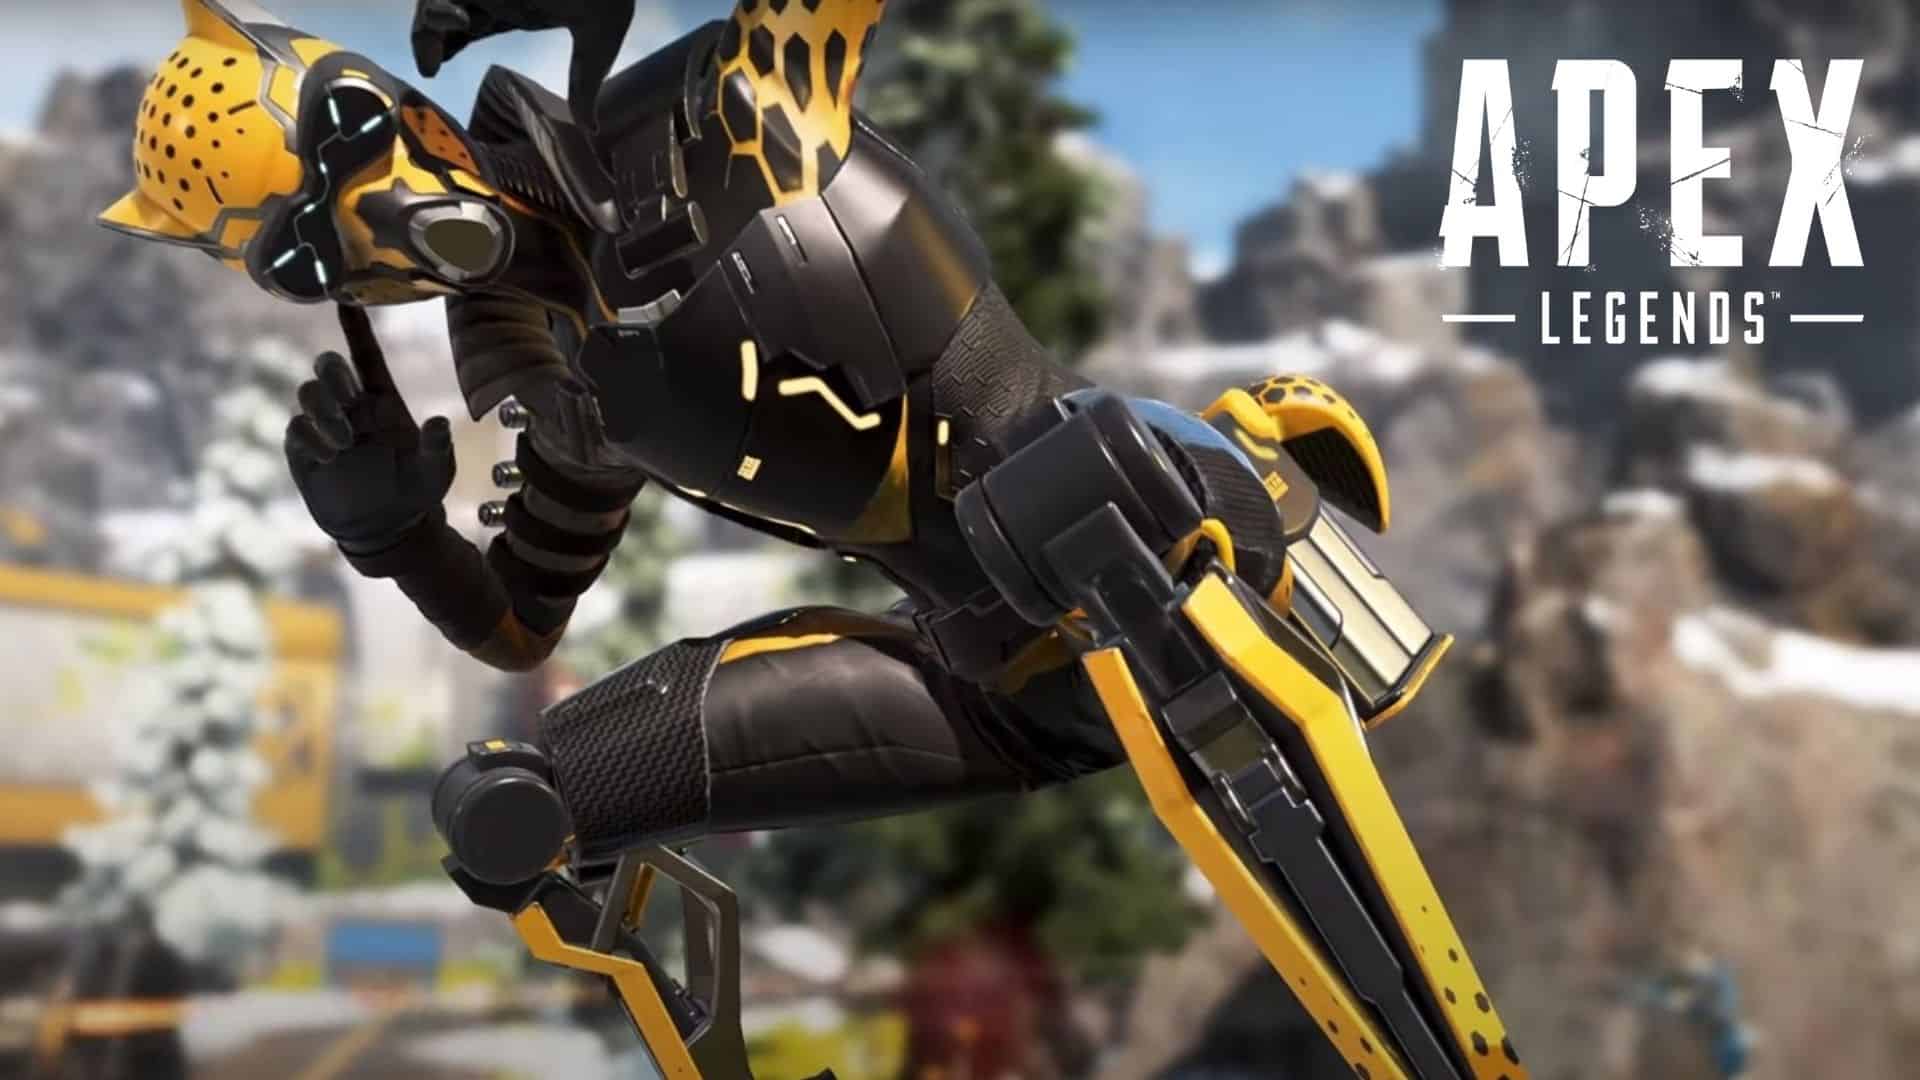 Octane in Apex Legends with black and yellow skin